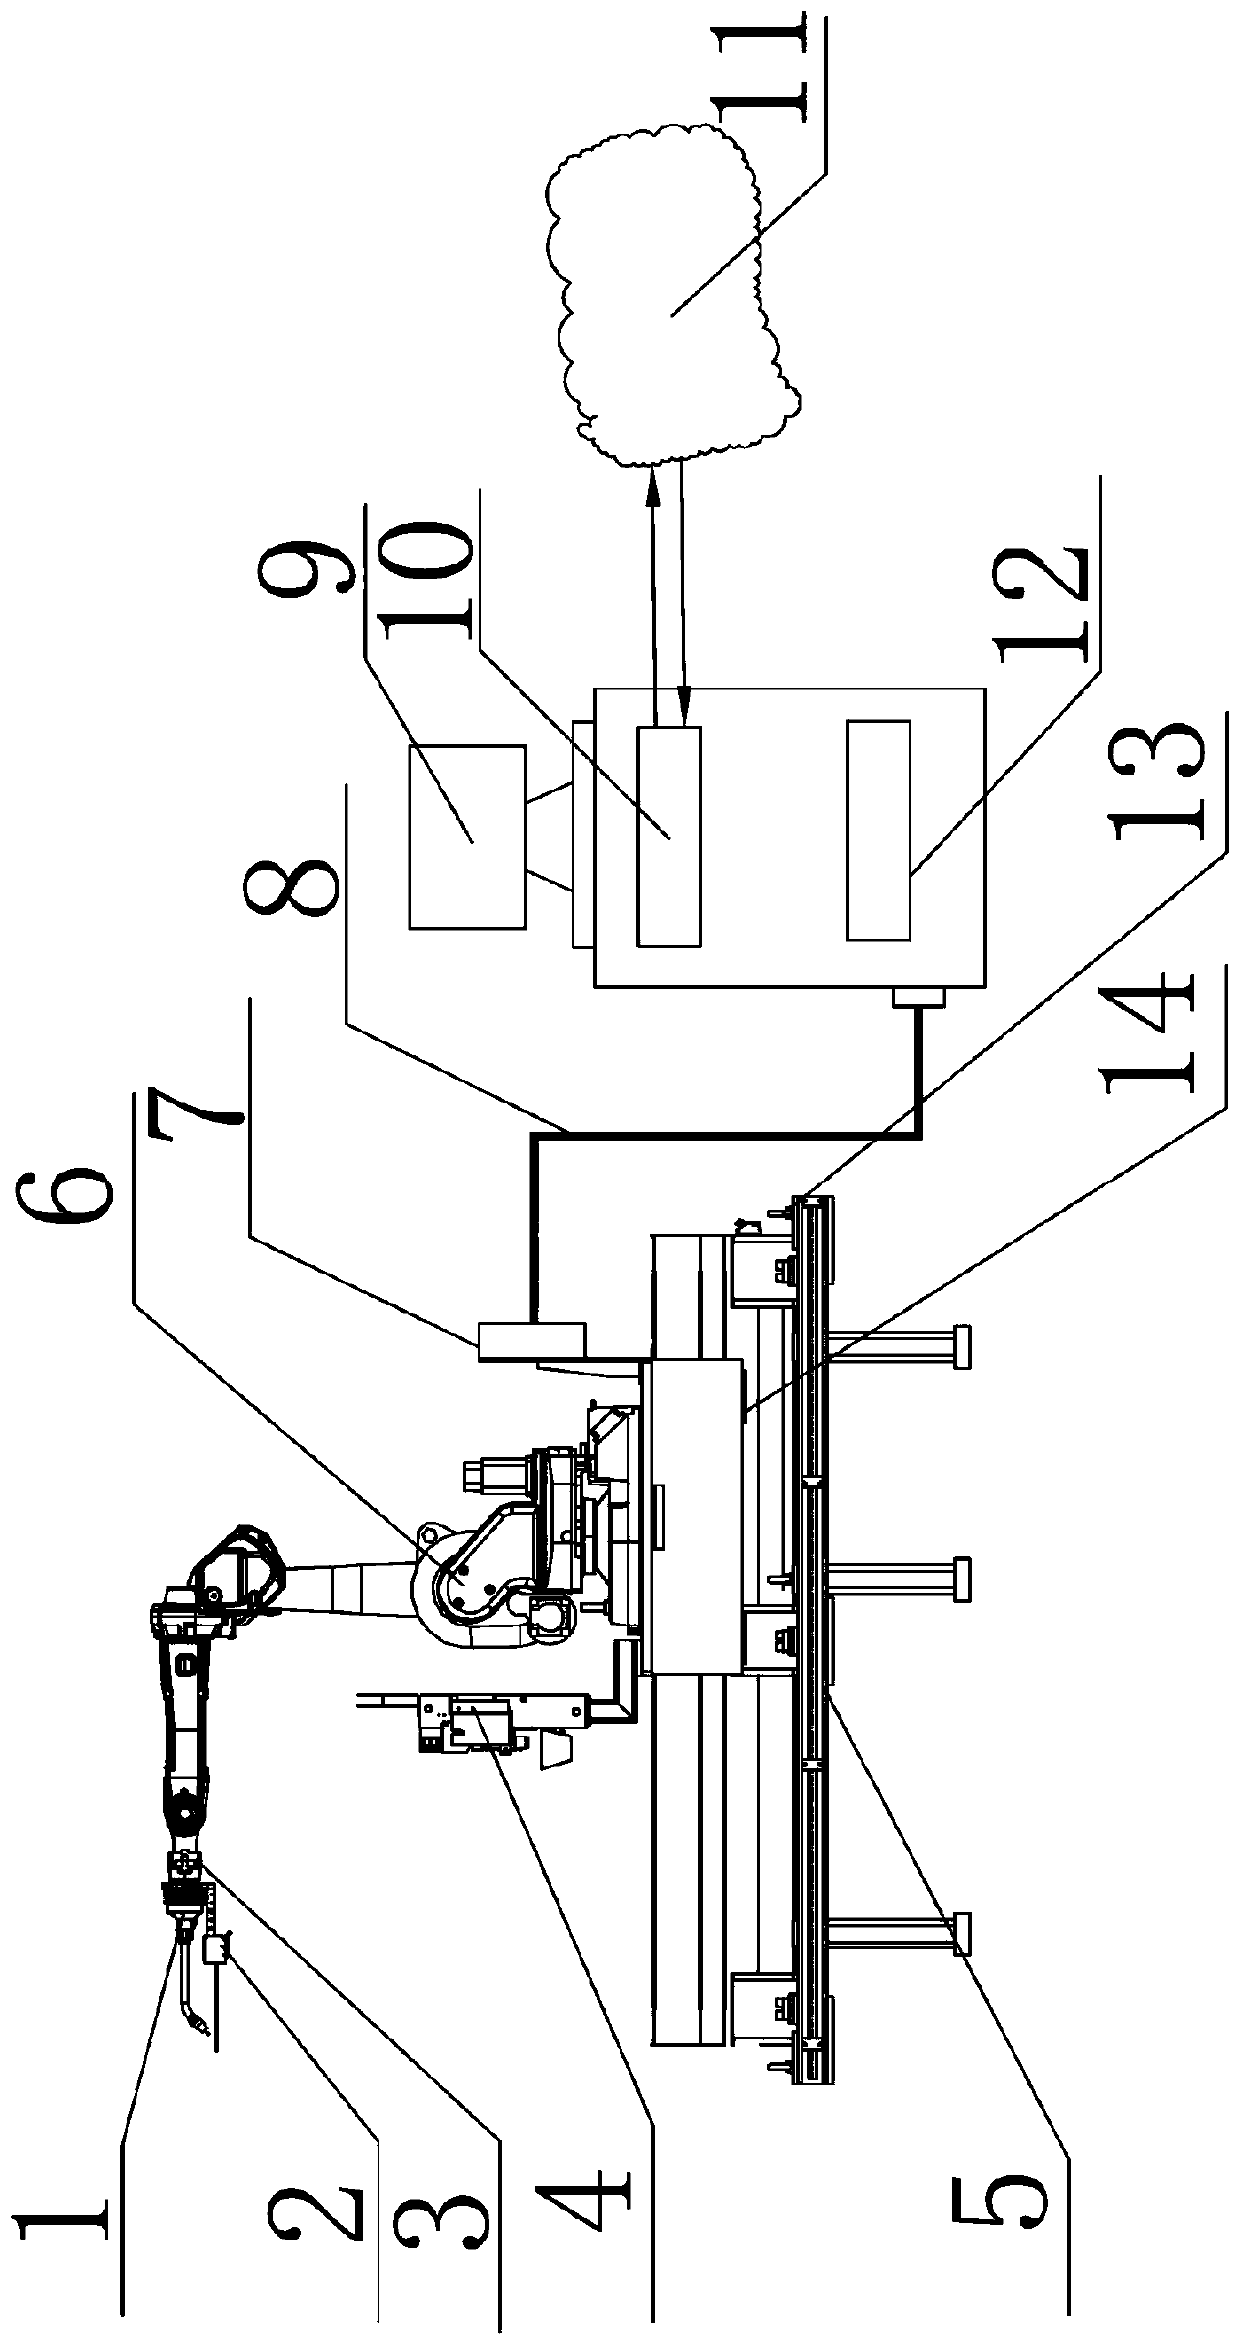 Welding robot for ship assembly grillage structure